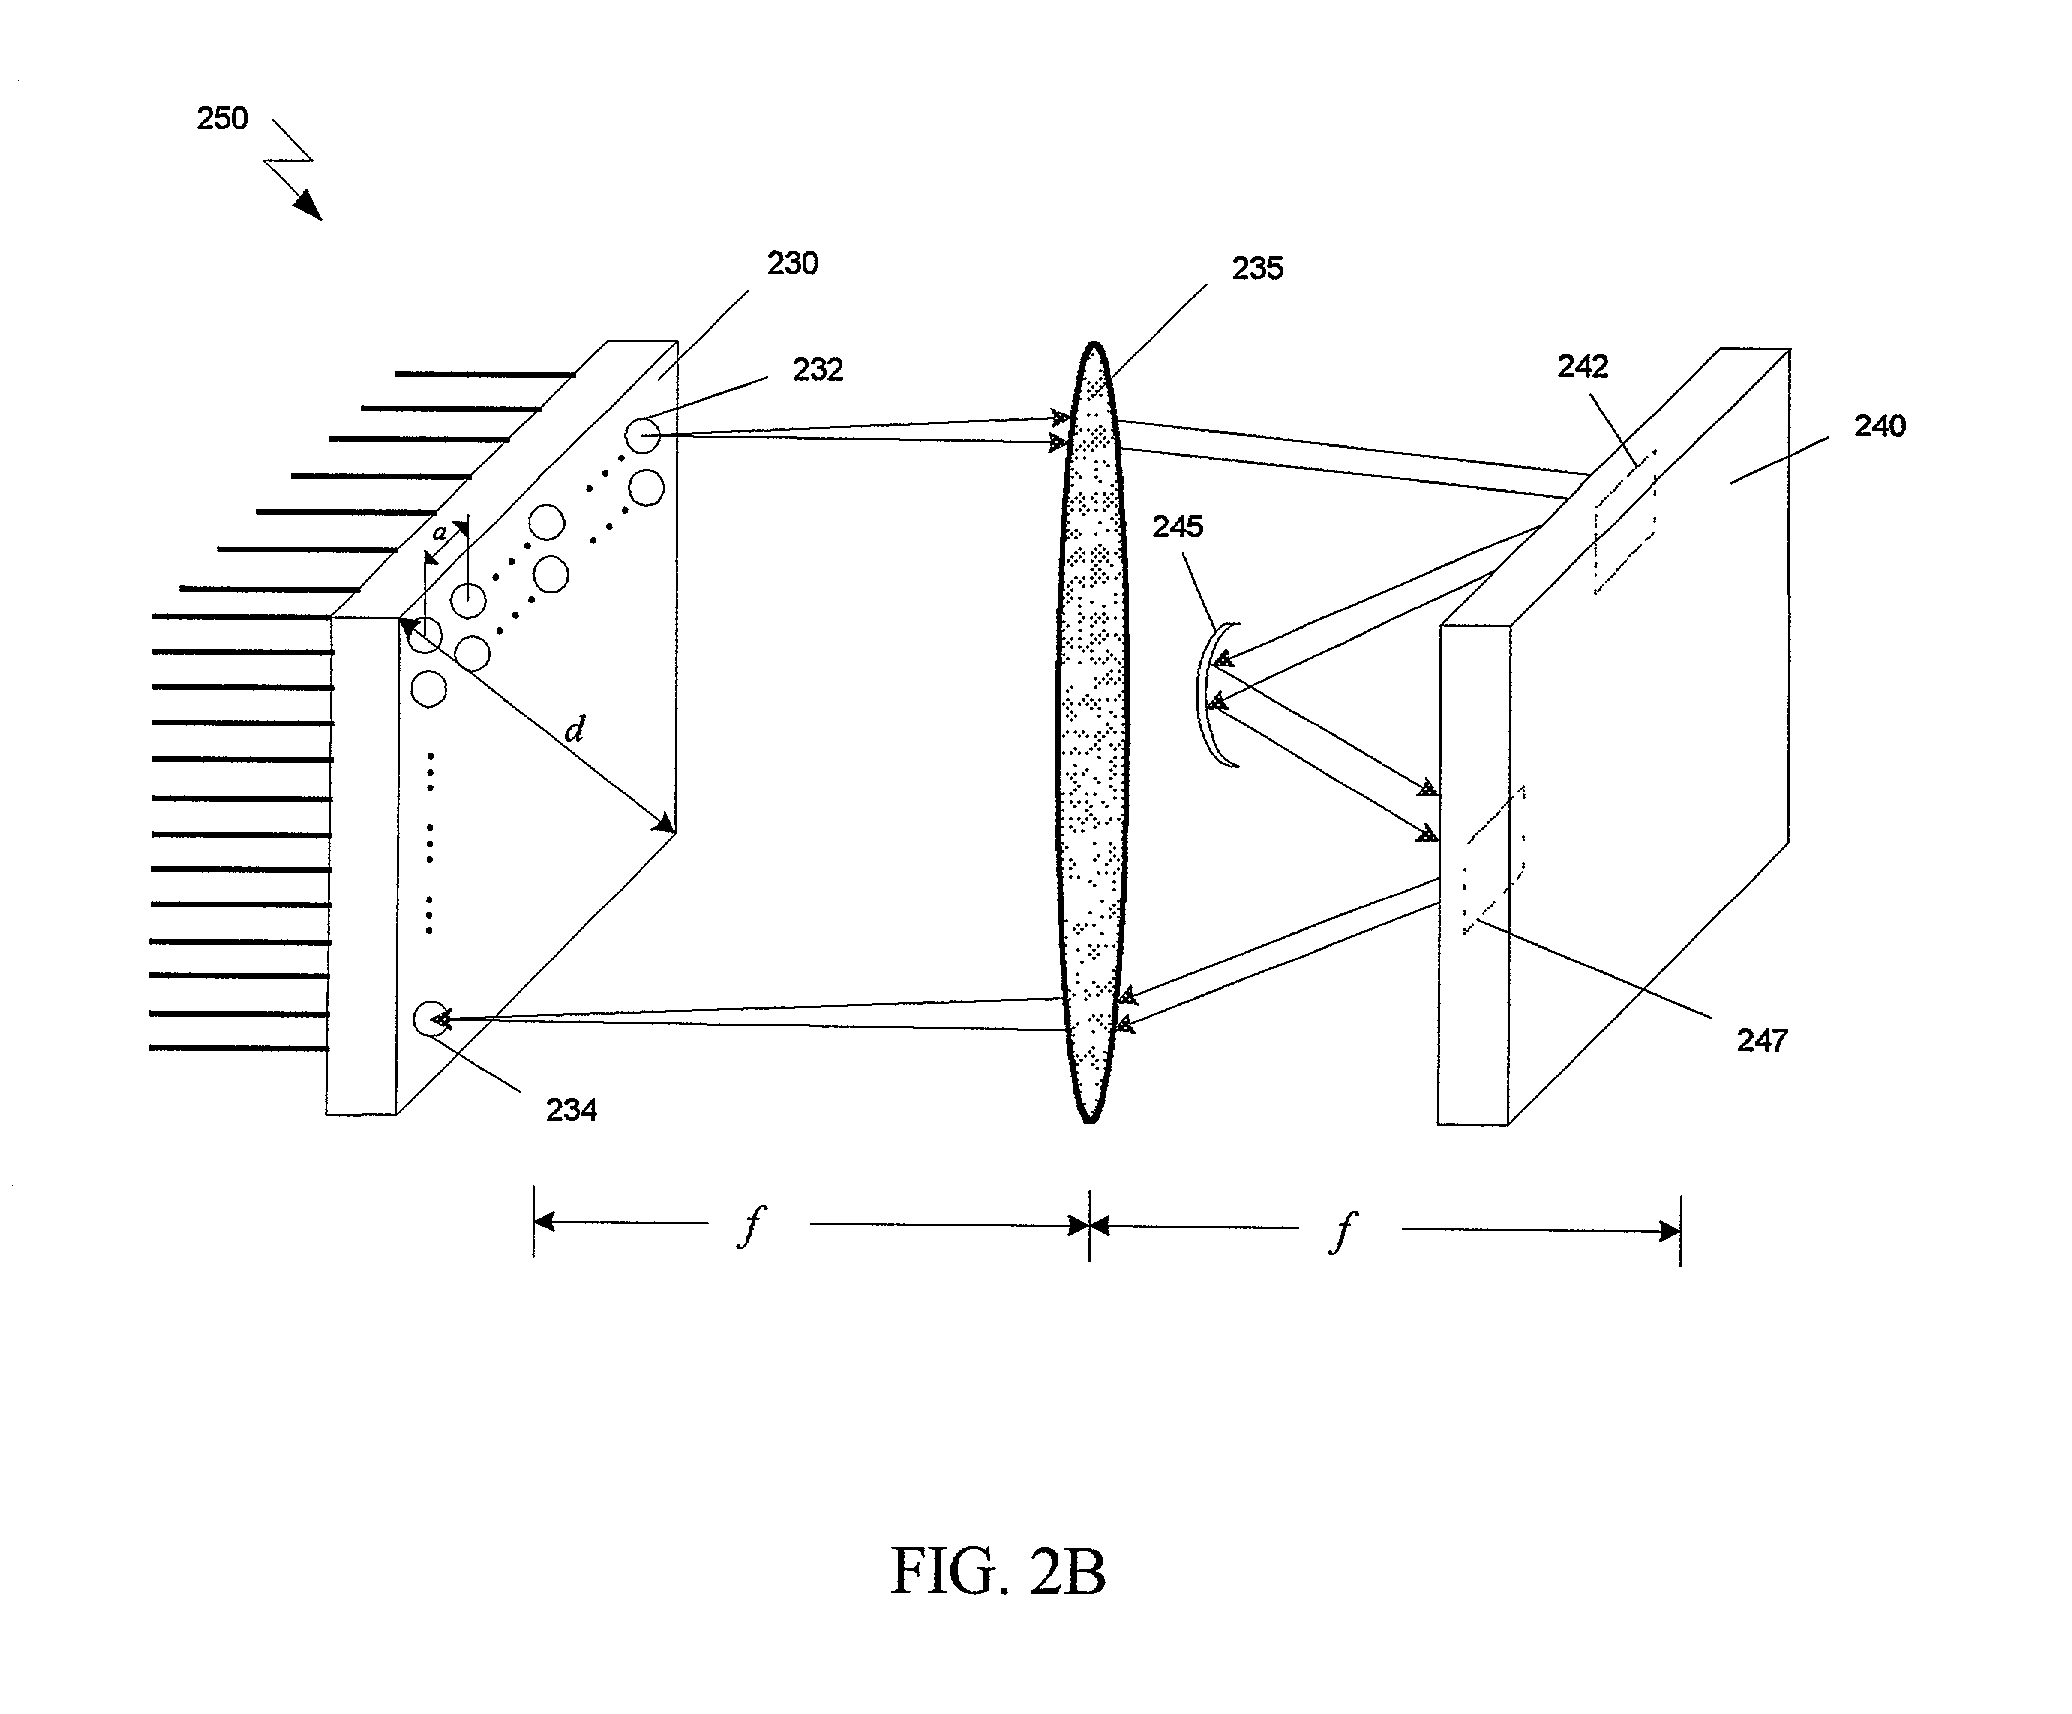 Electro-optical component having a reconfigurable phase state